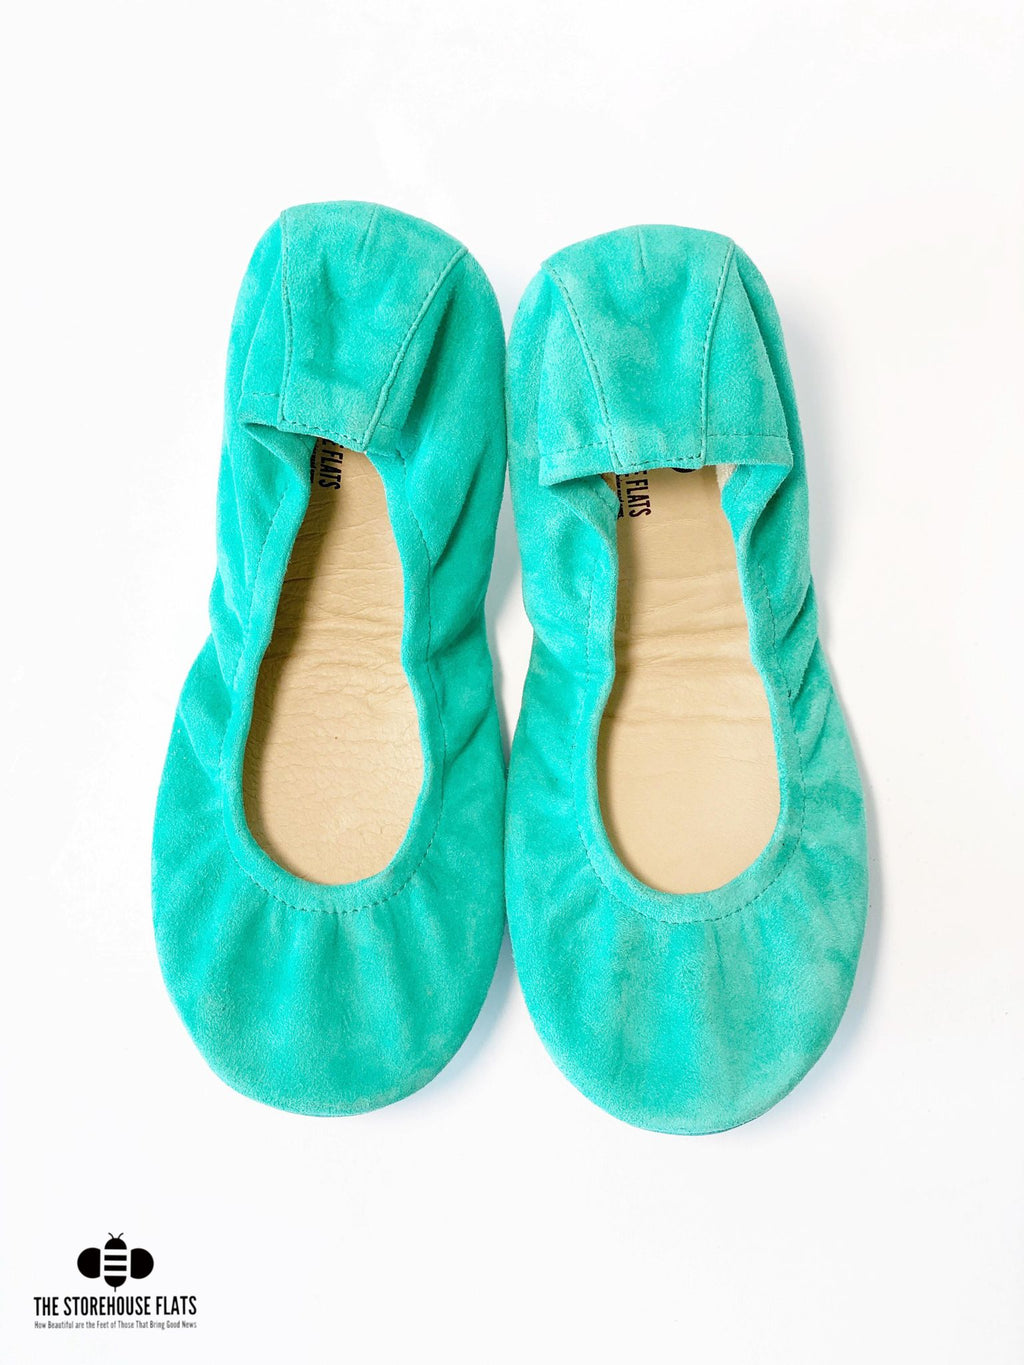 TROPICAL GREEN SUEDE | APRIL PREORDER - The Storehouse Flats